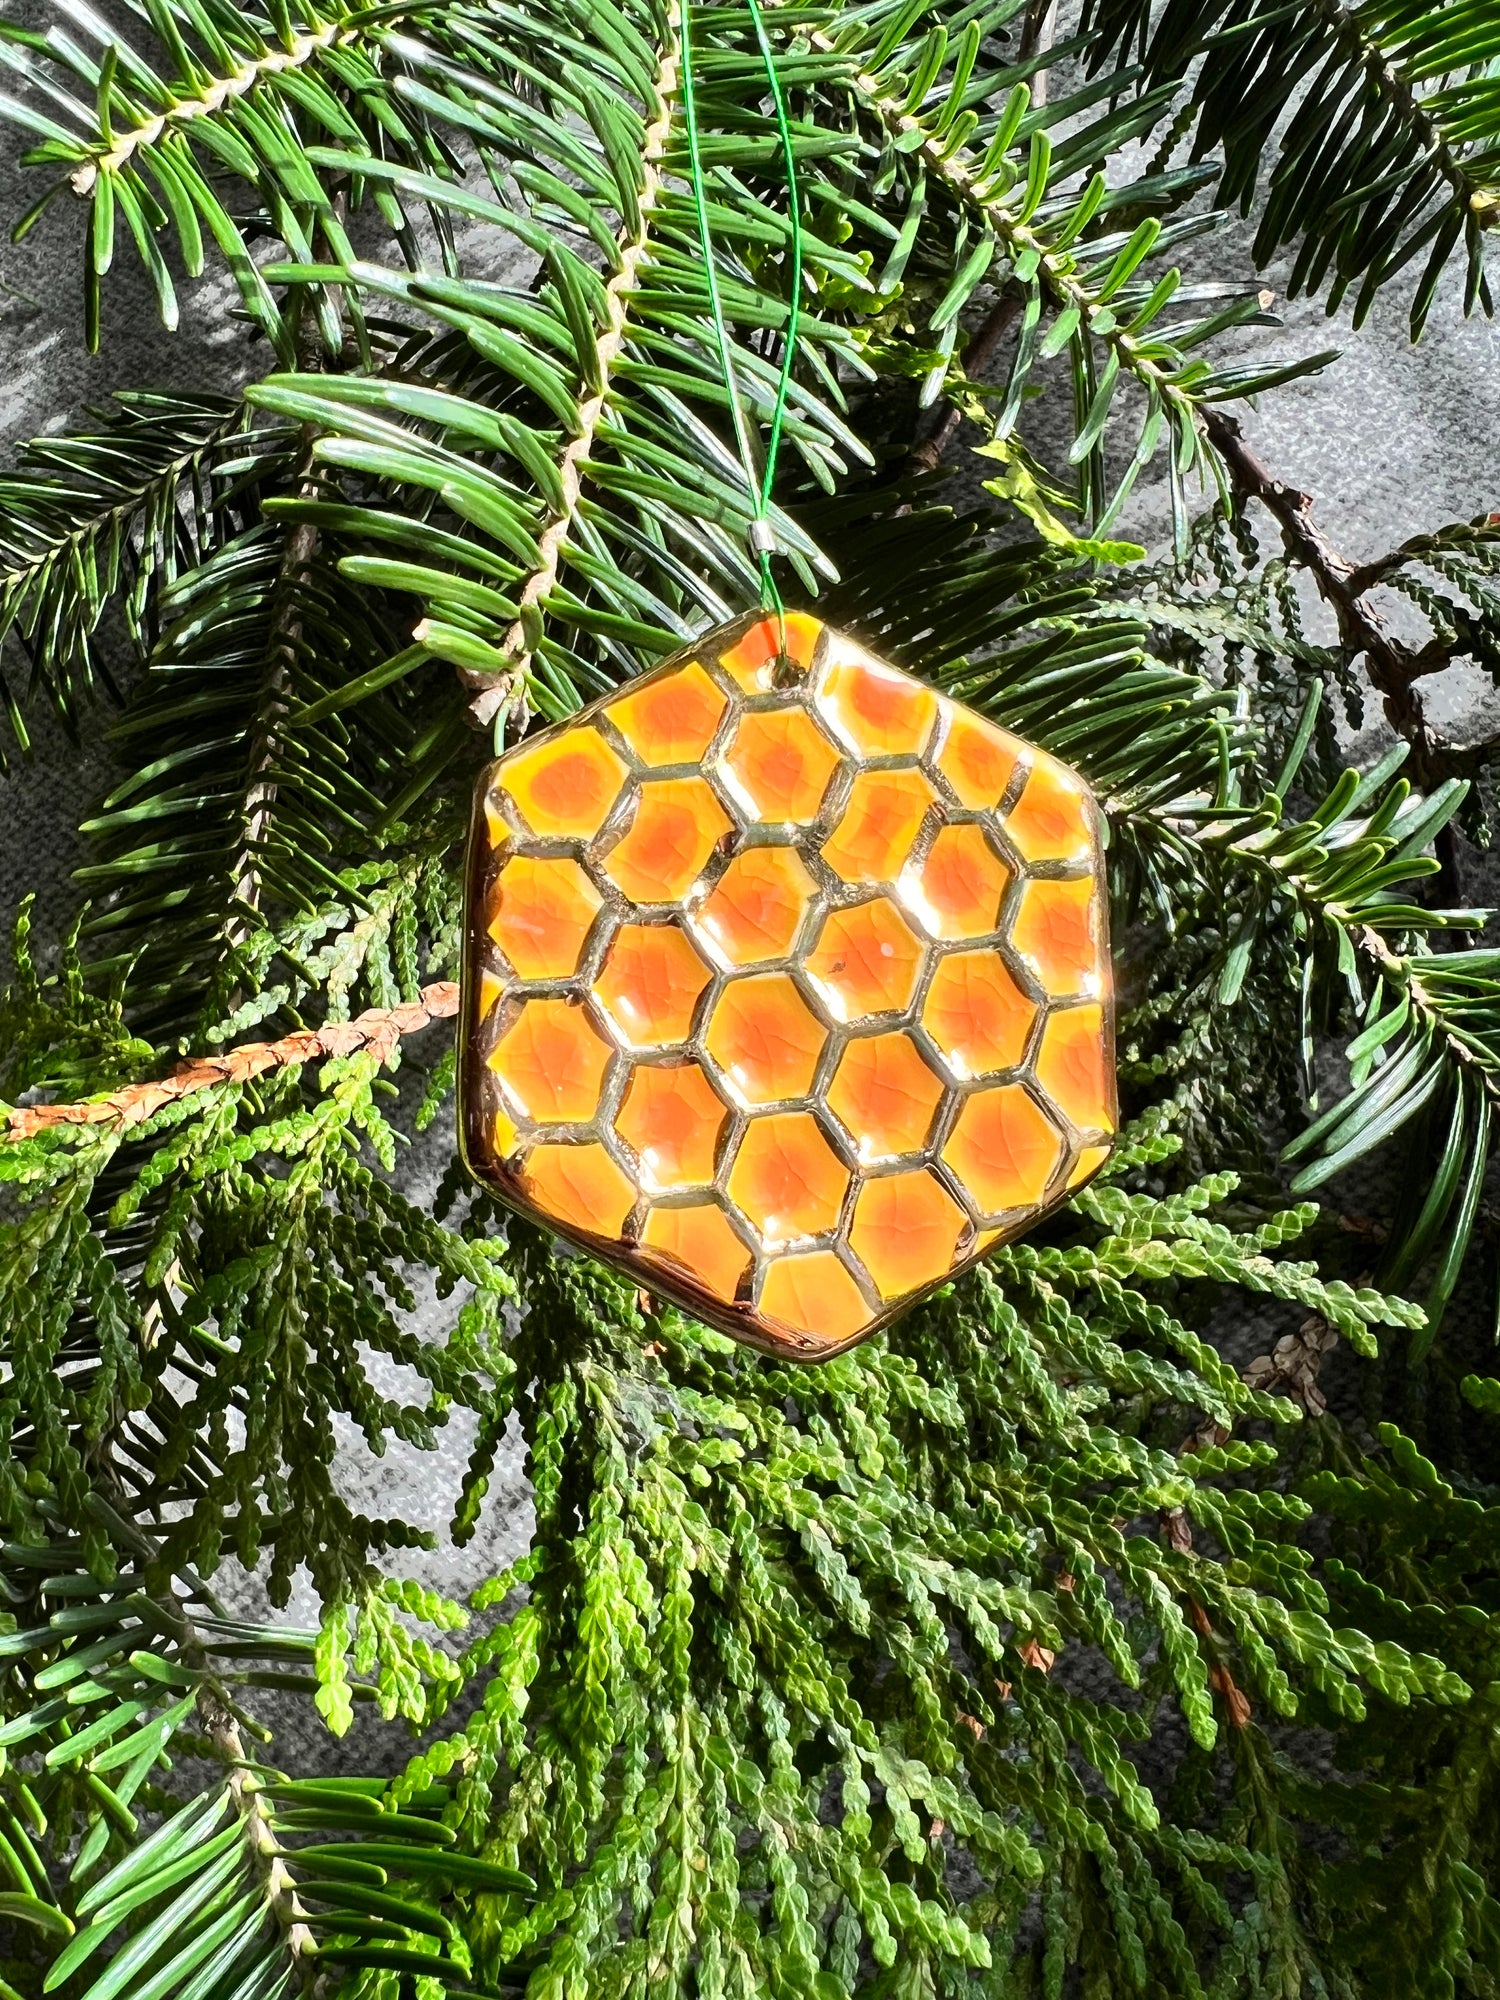 A yellow, orange, and gold hexagon with a textured honeycomb surface ornament hangs in front of cedar and balsam branches.